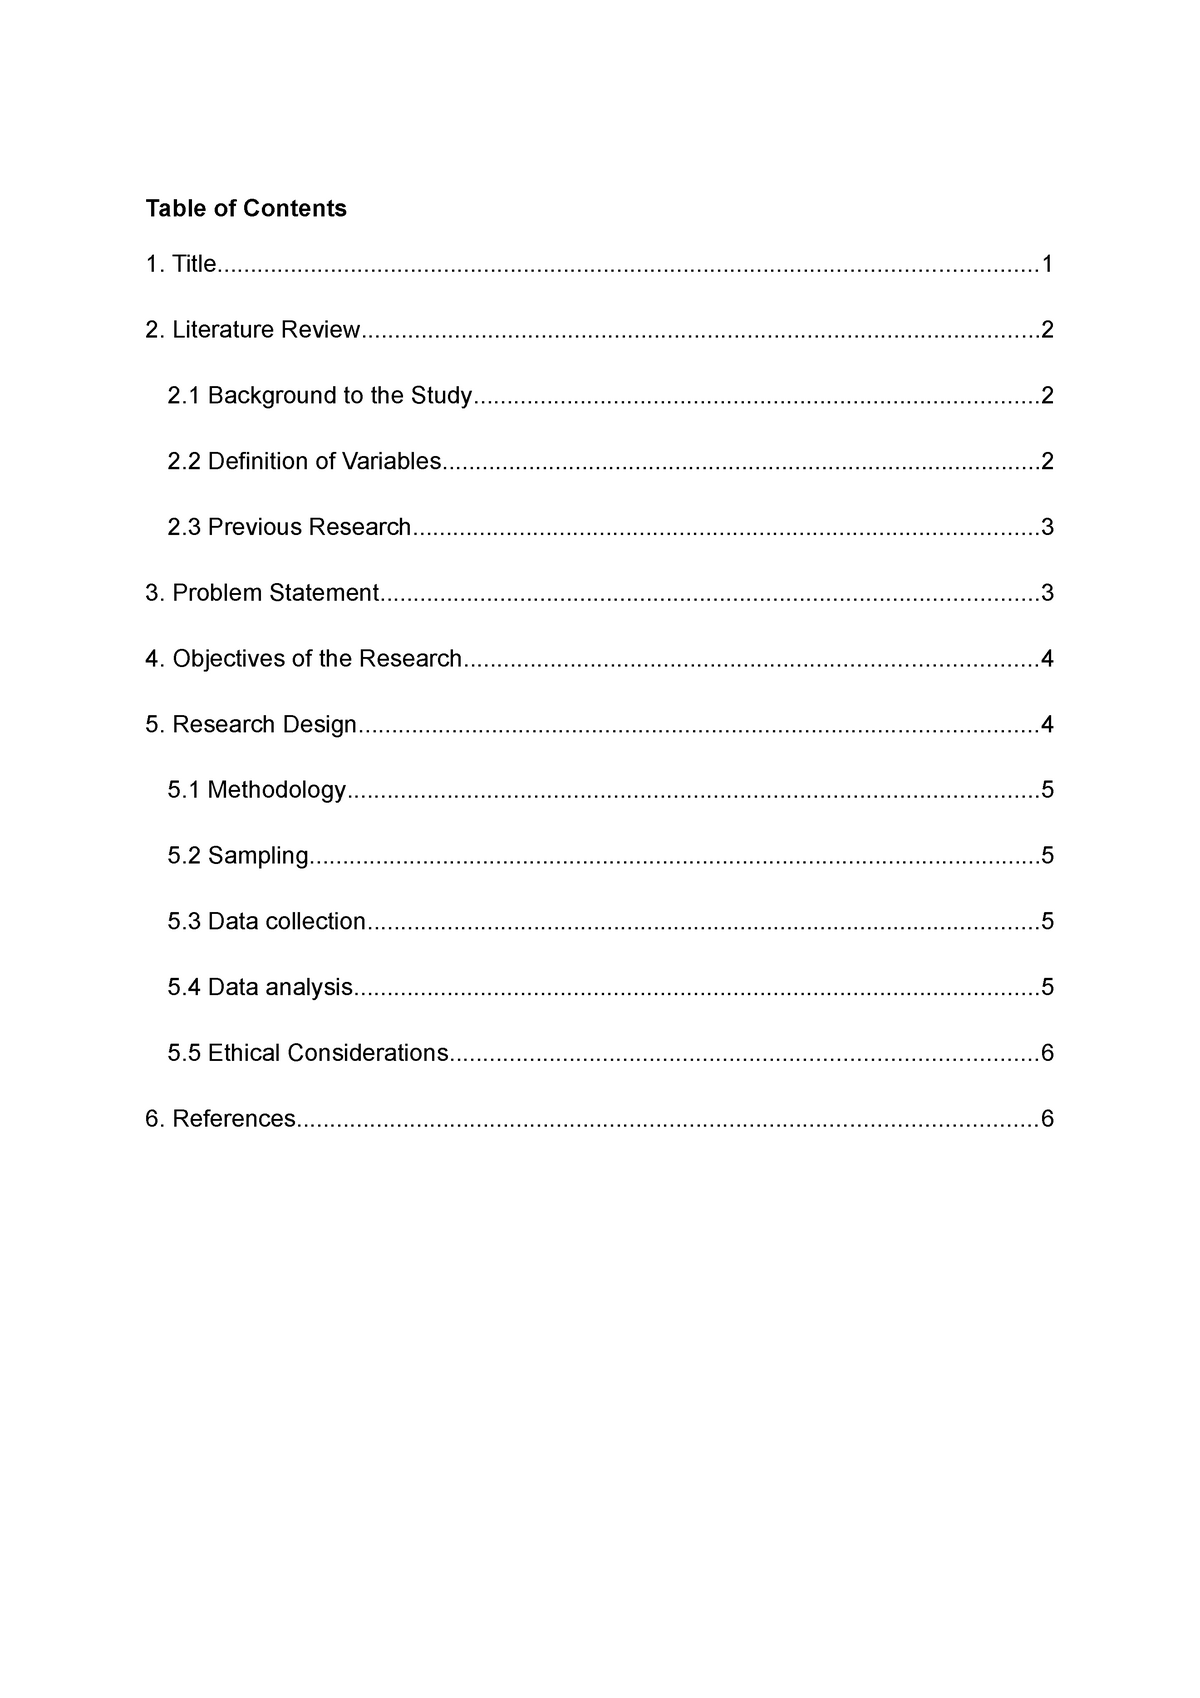 table of content of a research proposal